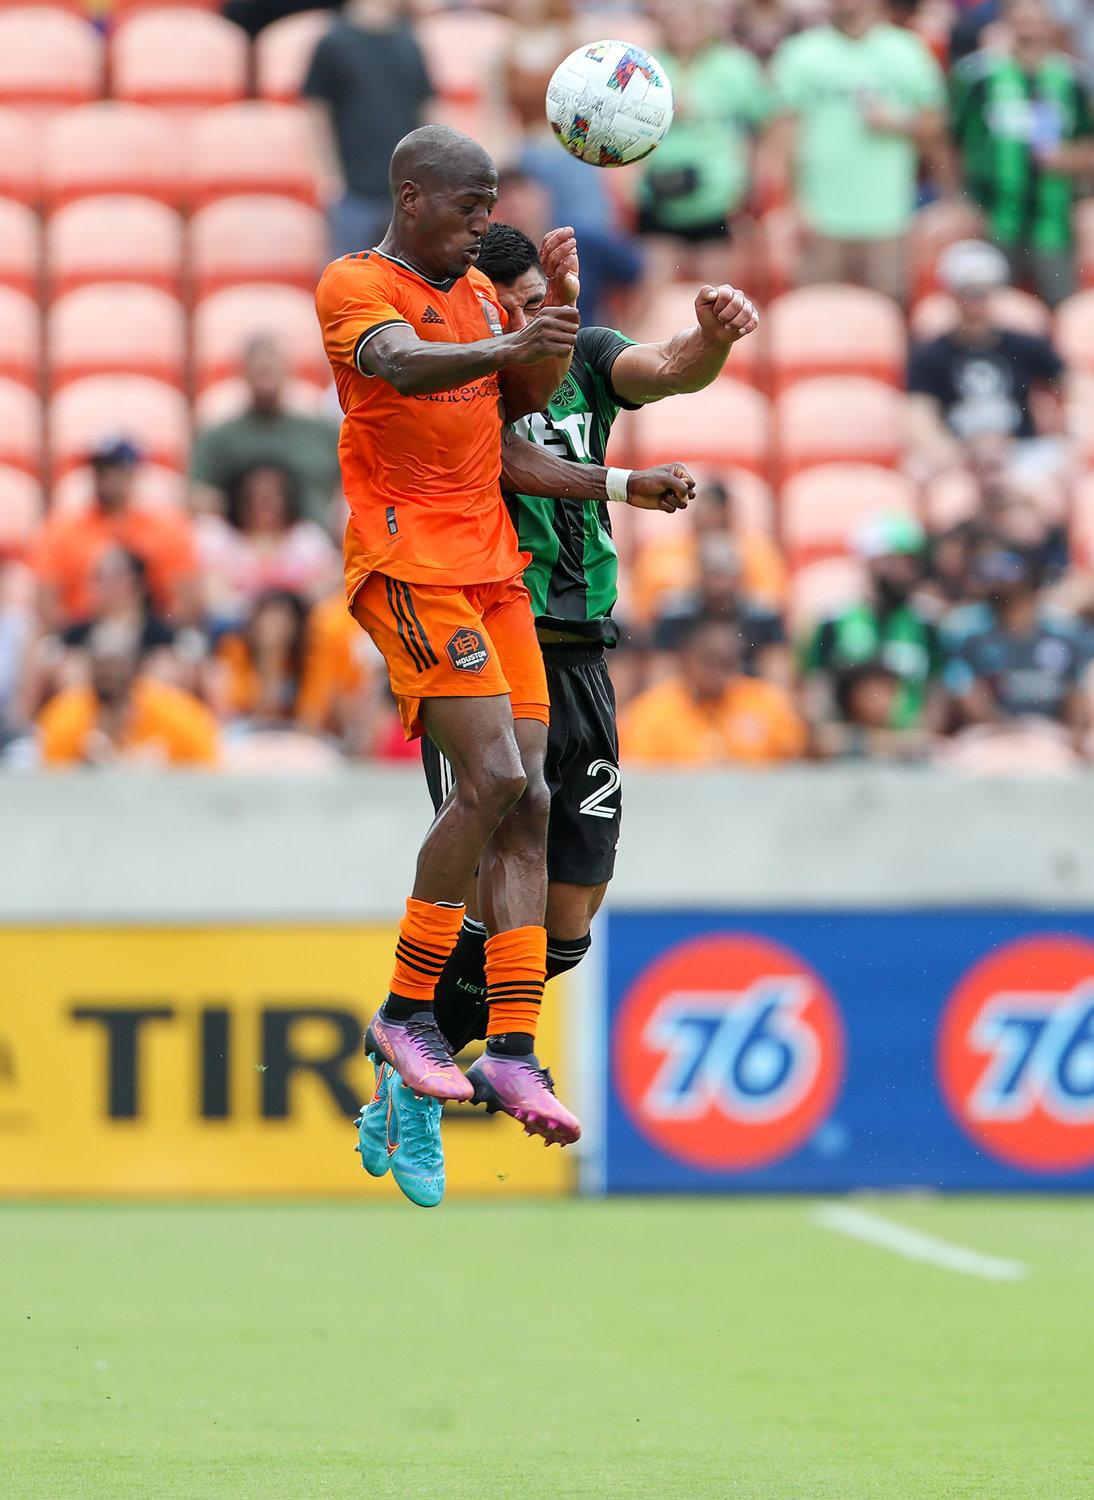 Houston Dynamo midfielder Fafà Picault (10) leaps to head the ball over Austin FC defender Nick Lima (24) during the first half of a Major League Soccer match on April 30, 2022 in Houston, Texas.